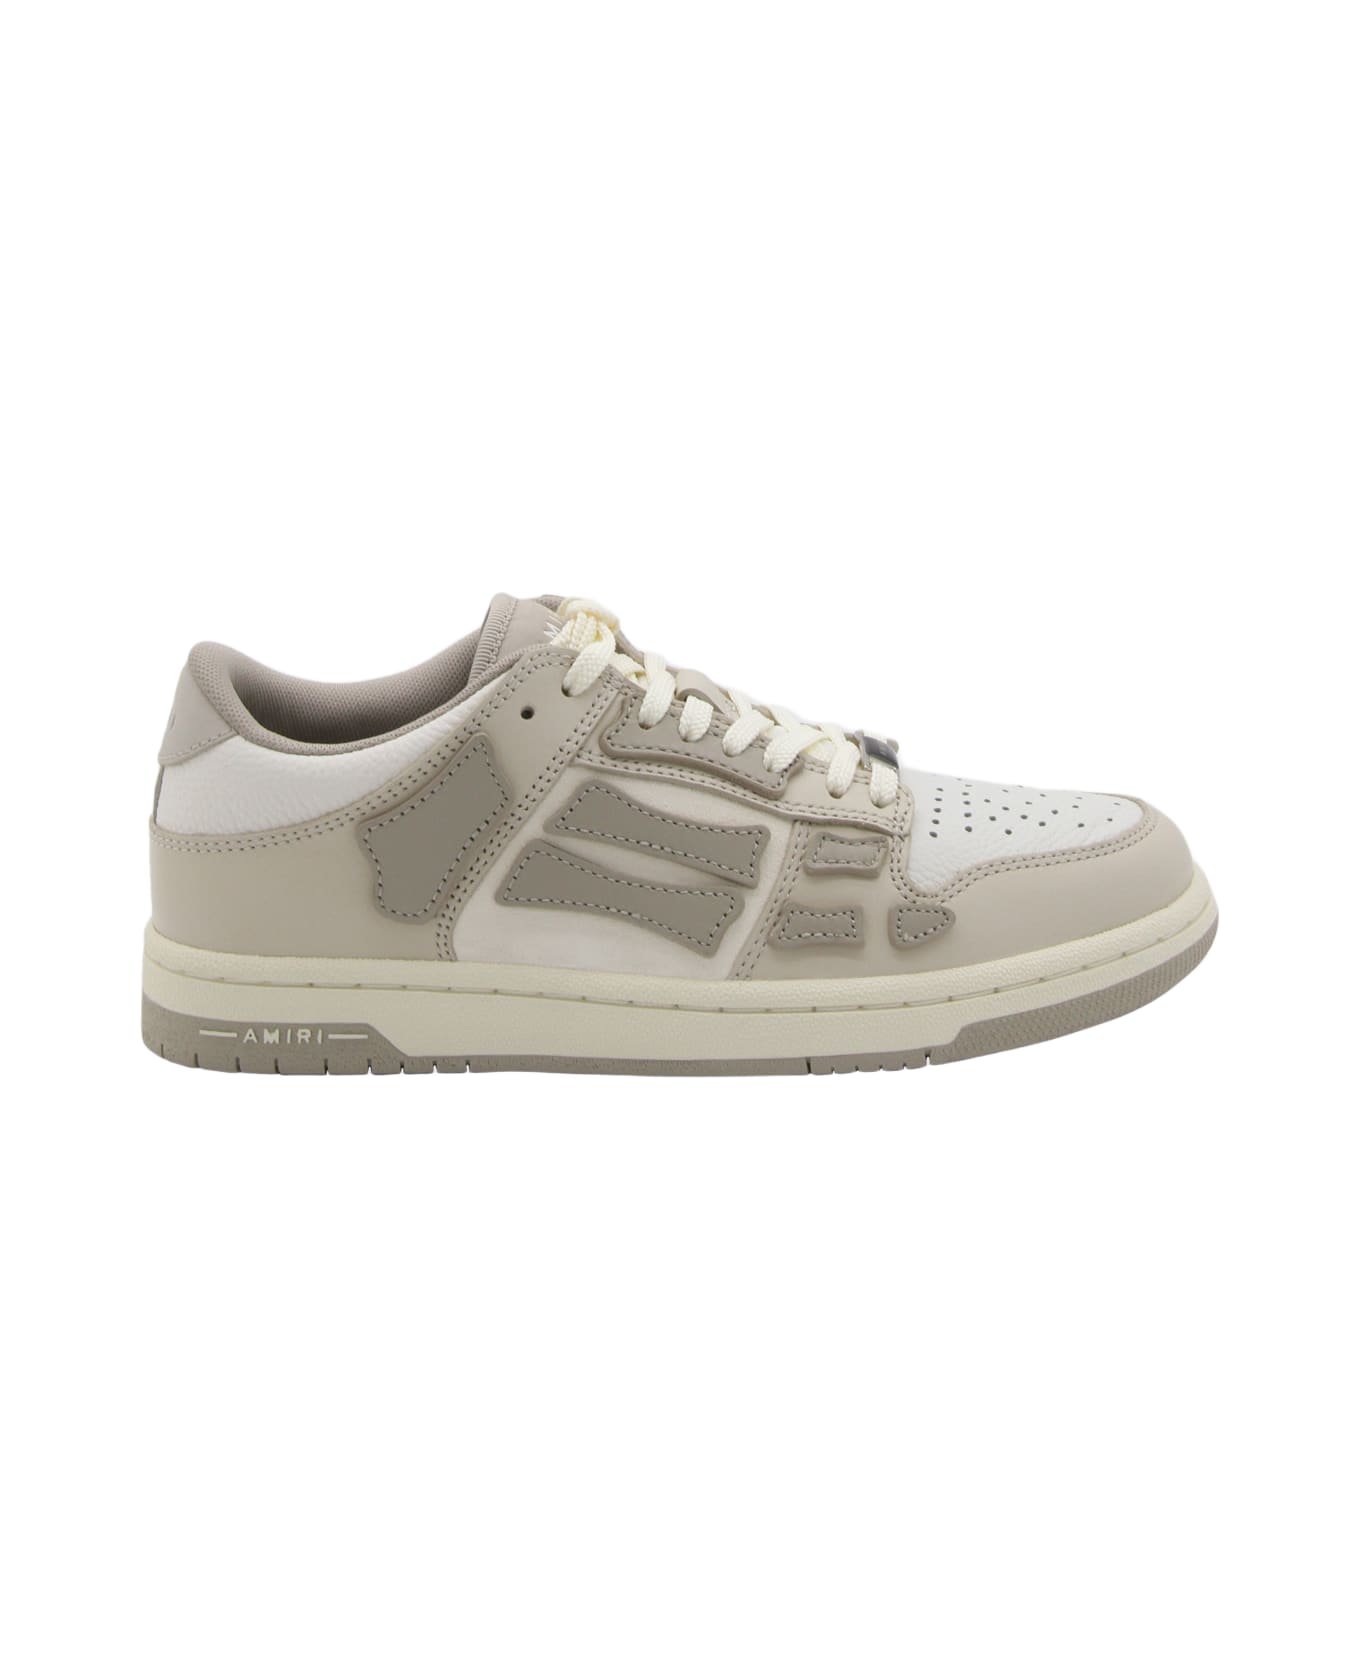 AMIRI White And Grey Leather Sneakers - ALABASTER